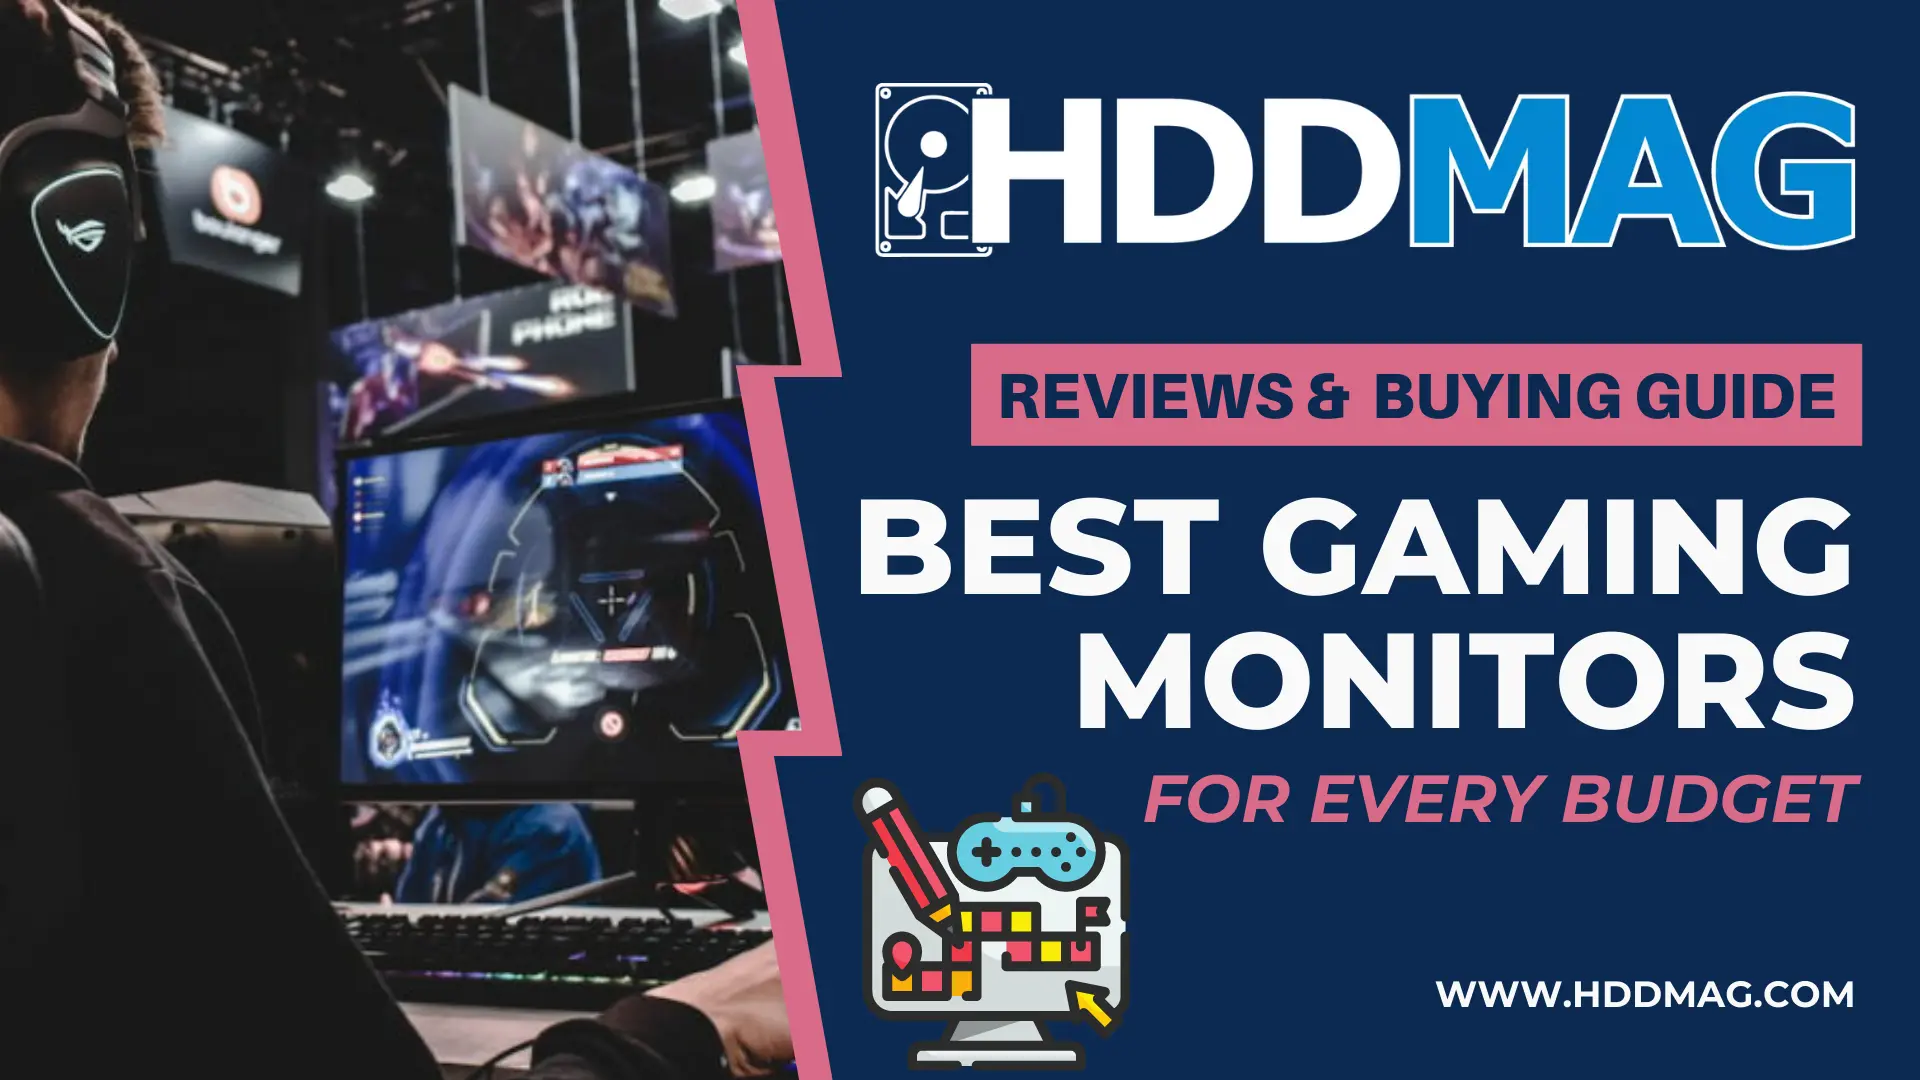 Best Gaming Monitors for Every Budget